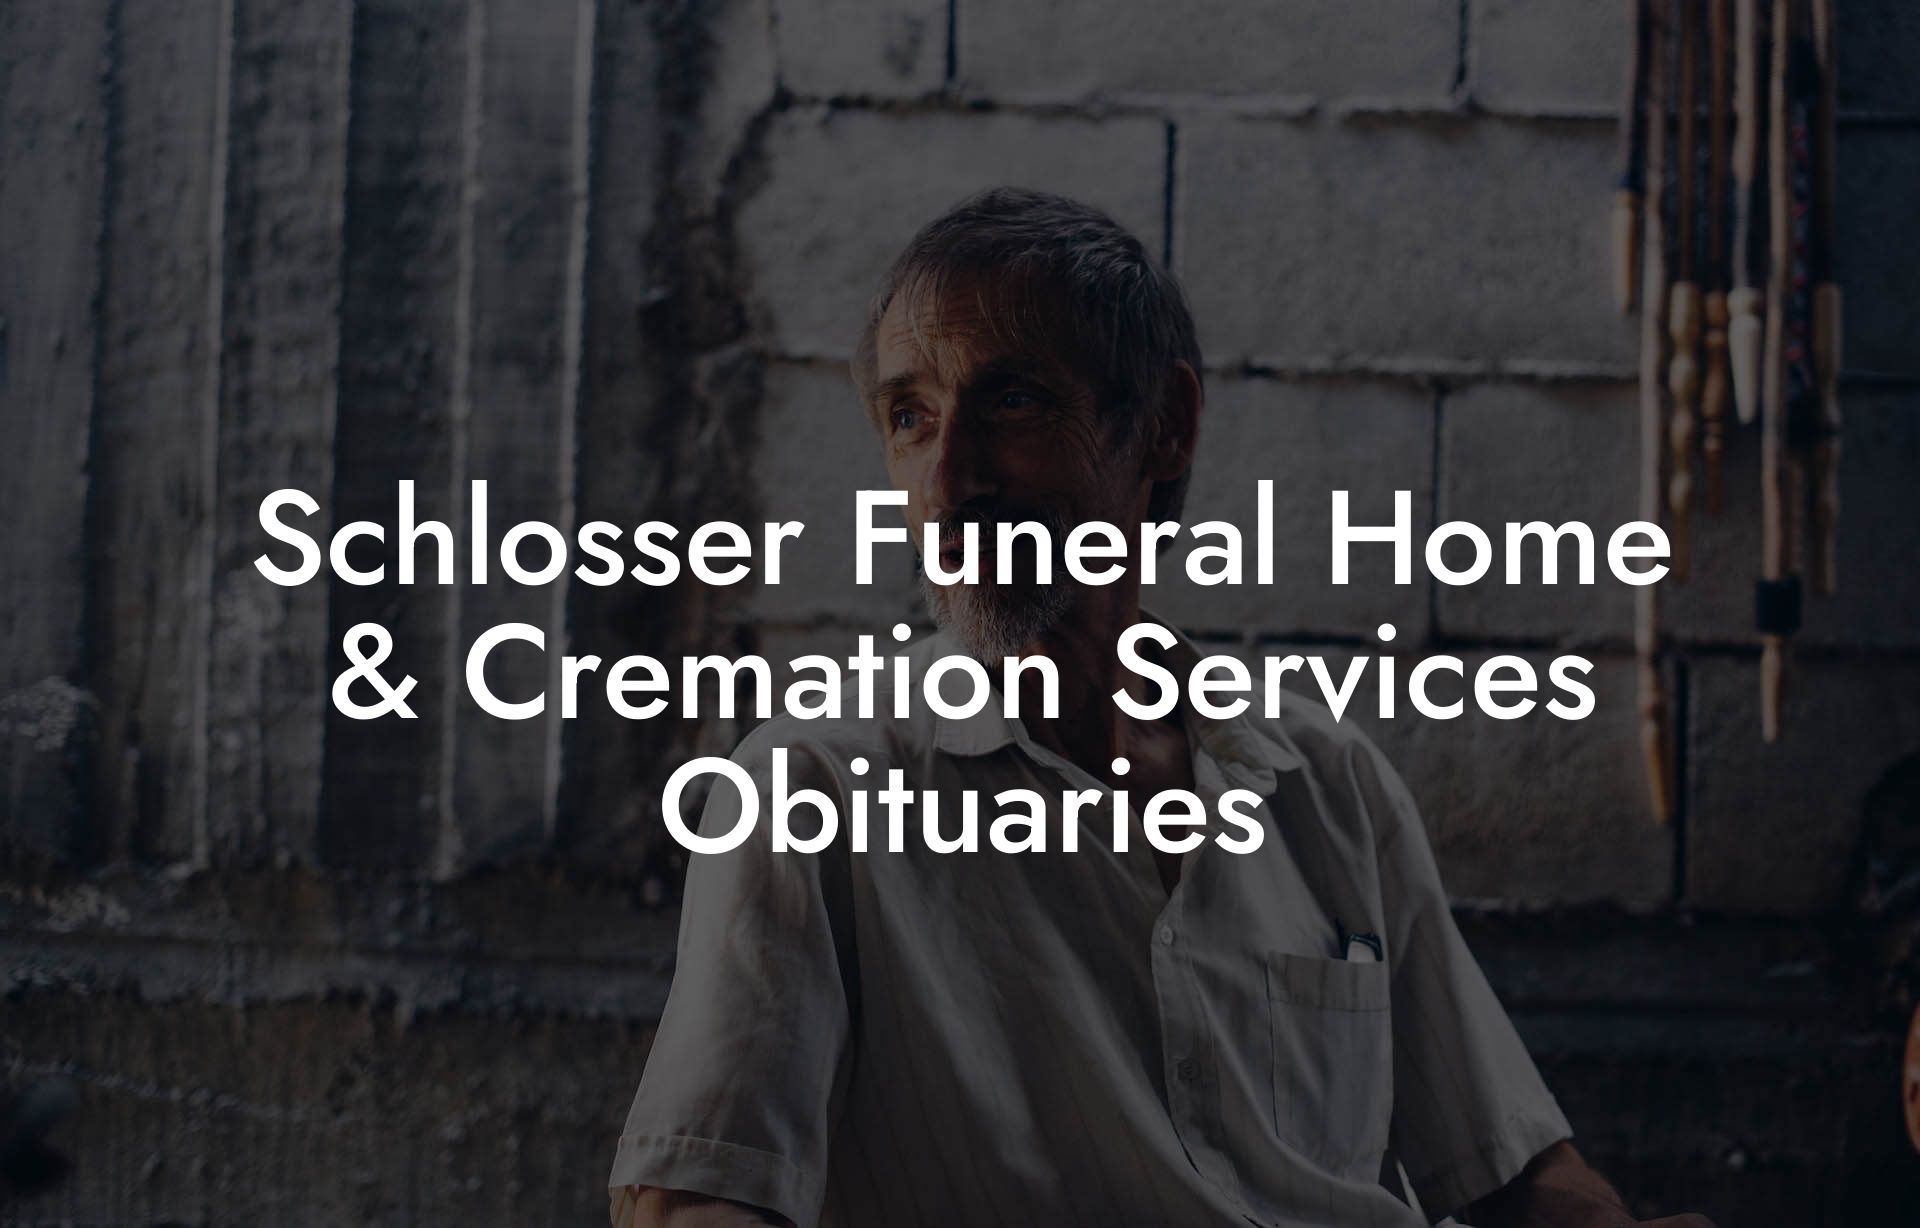 Schlosser Funeral Home & Cremation Services Obituaries